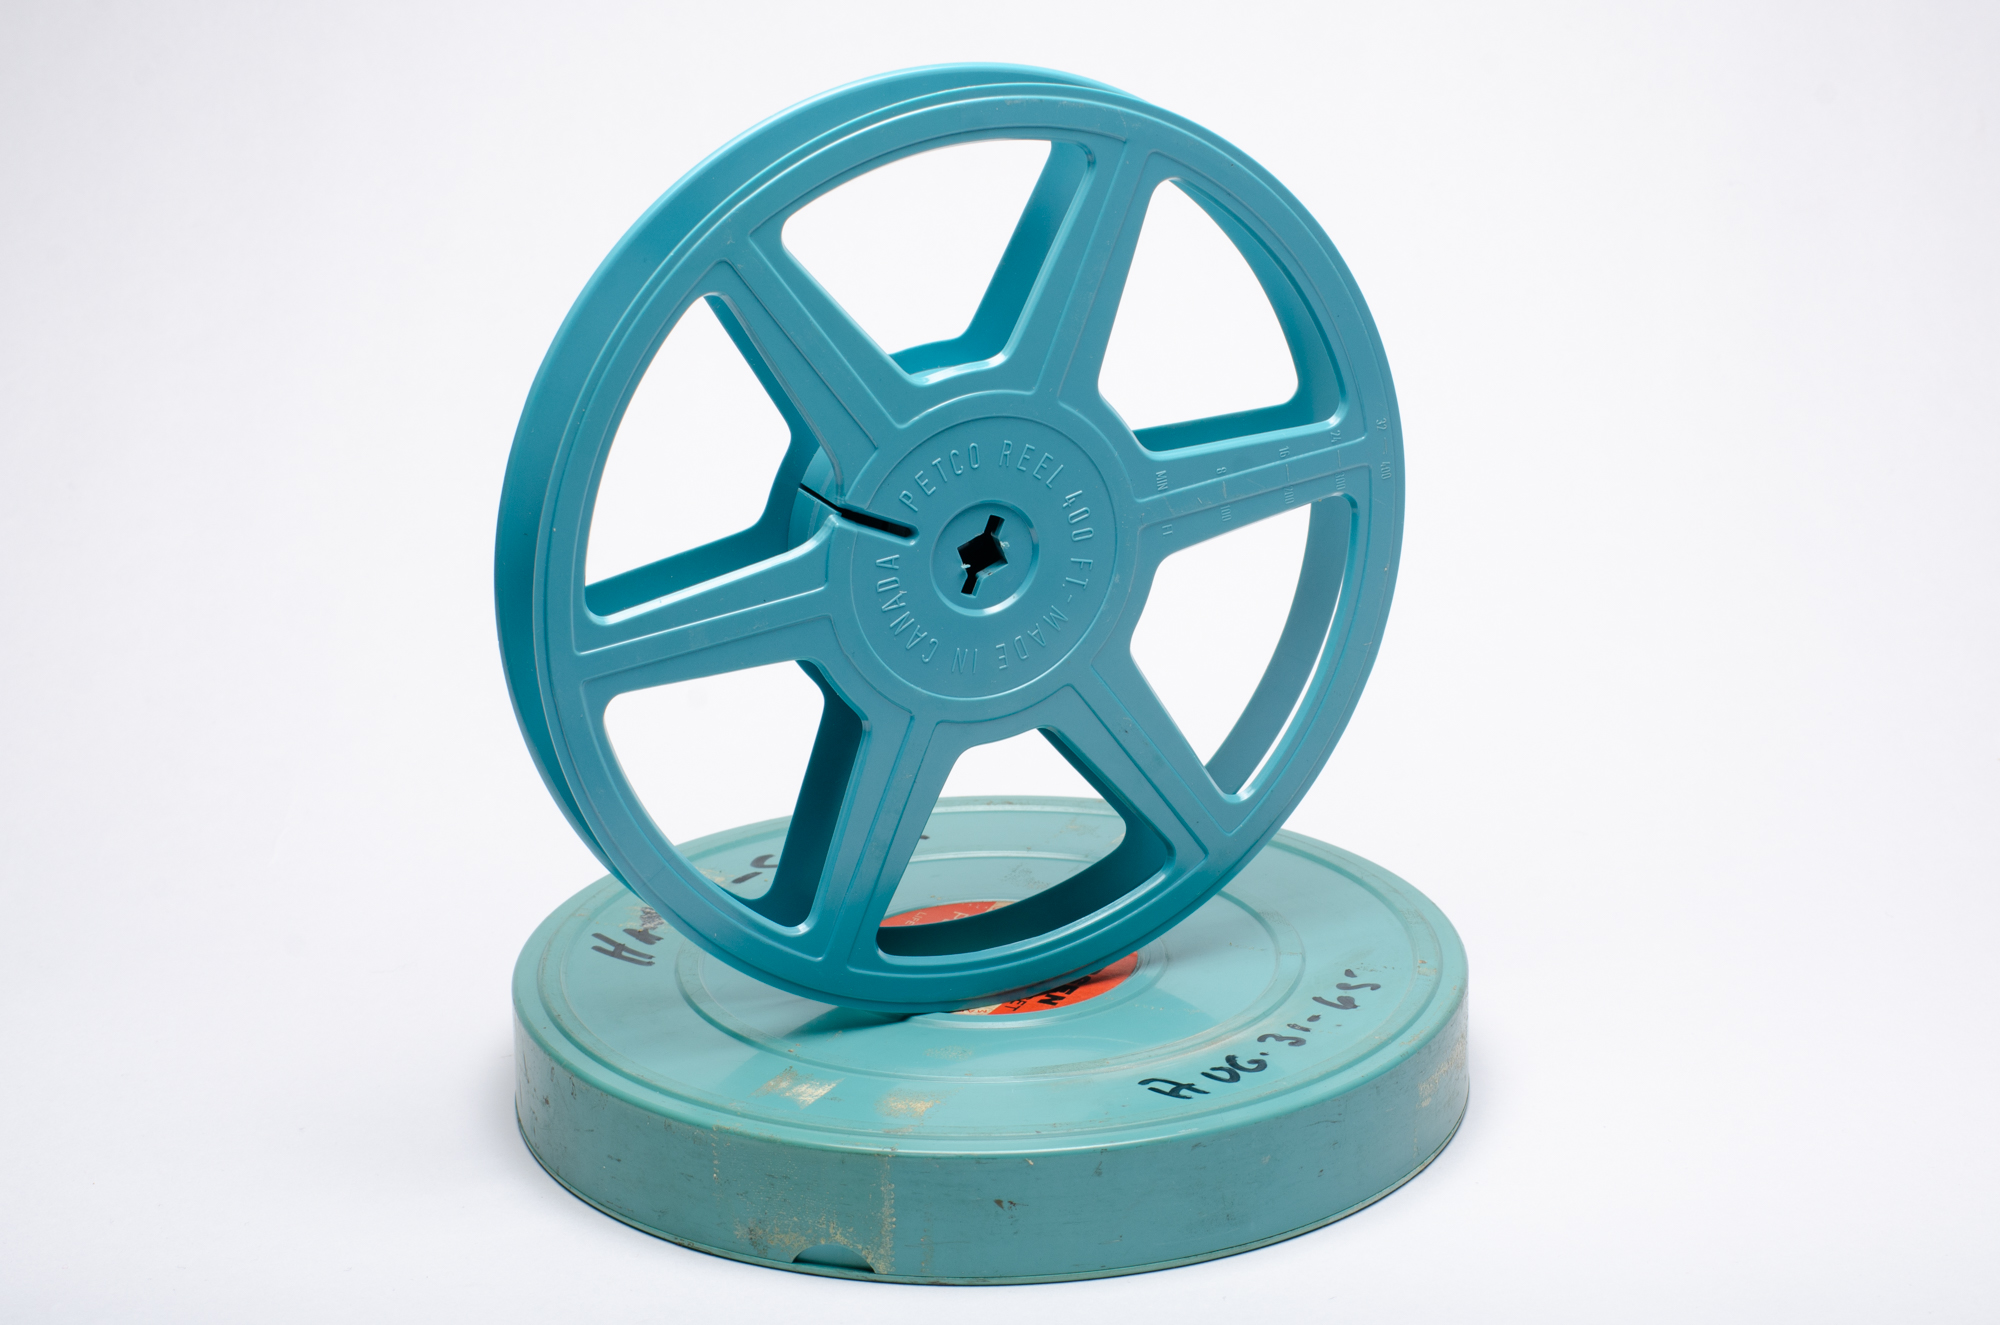 https://lift.ca/wp-content/uploads/2020/01/16mm-400-Can-and-Reel-Used-003.jpg